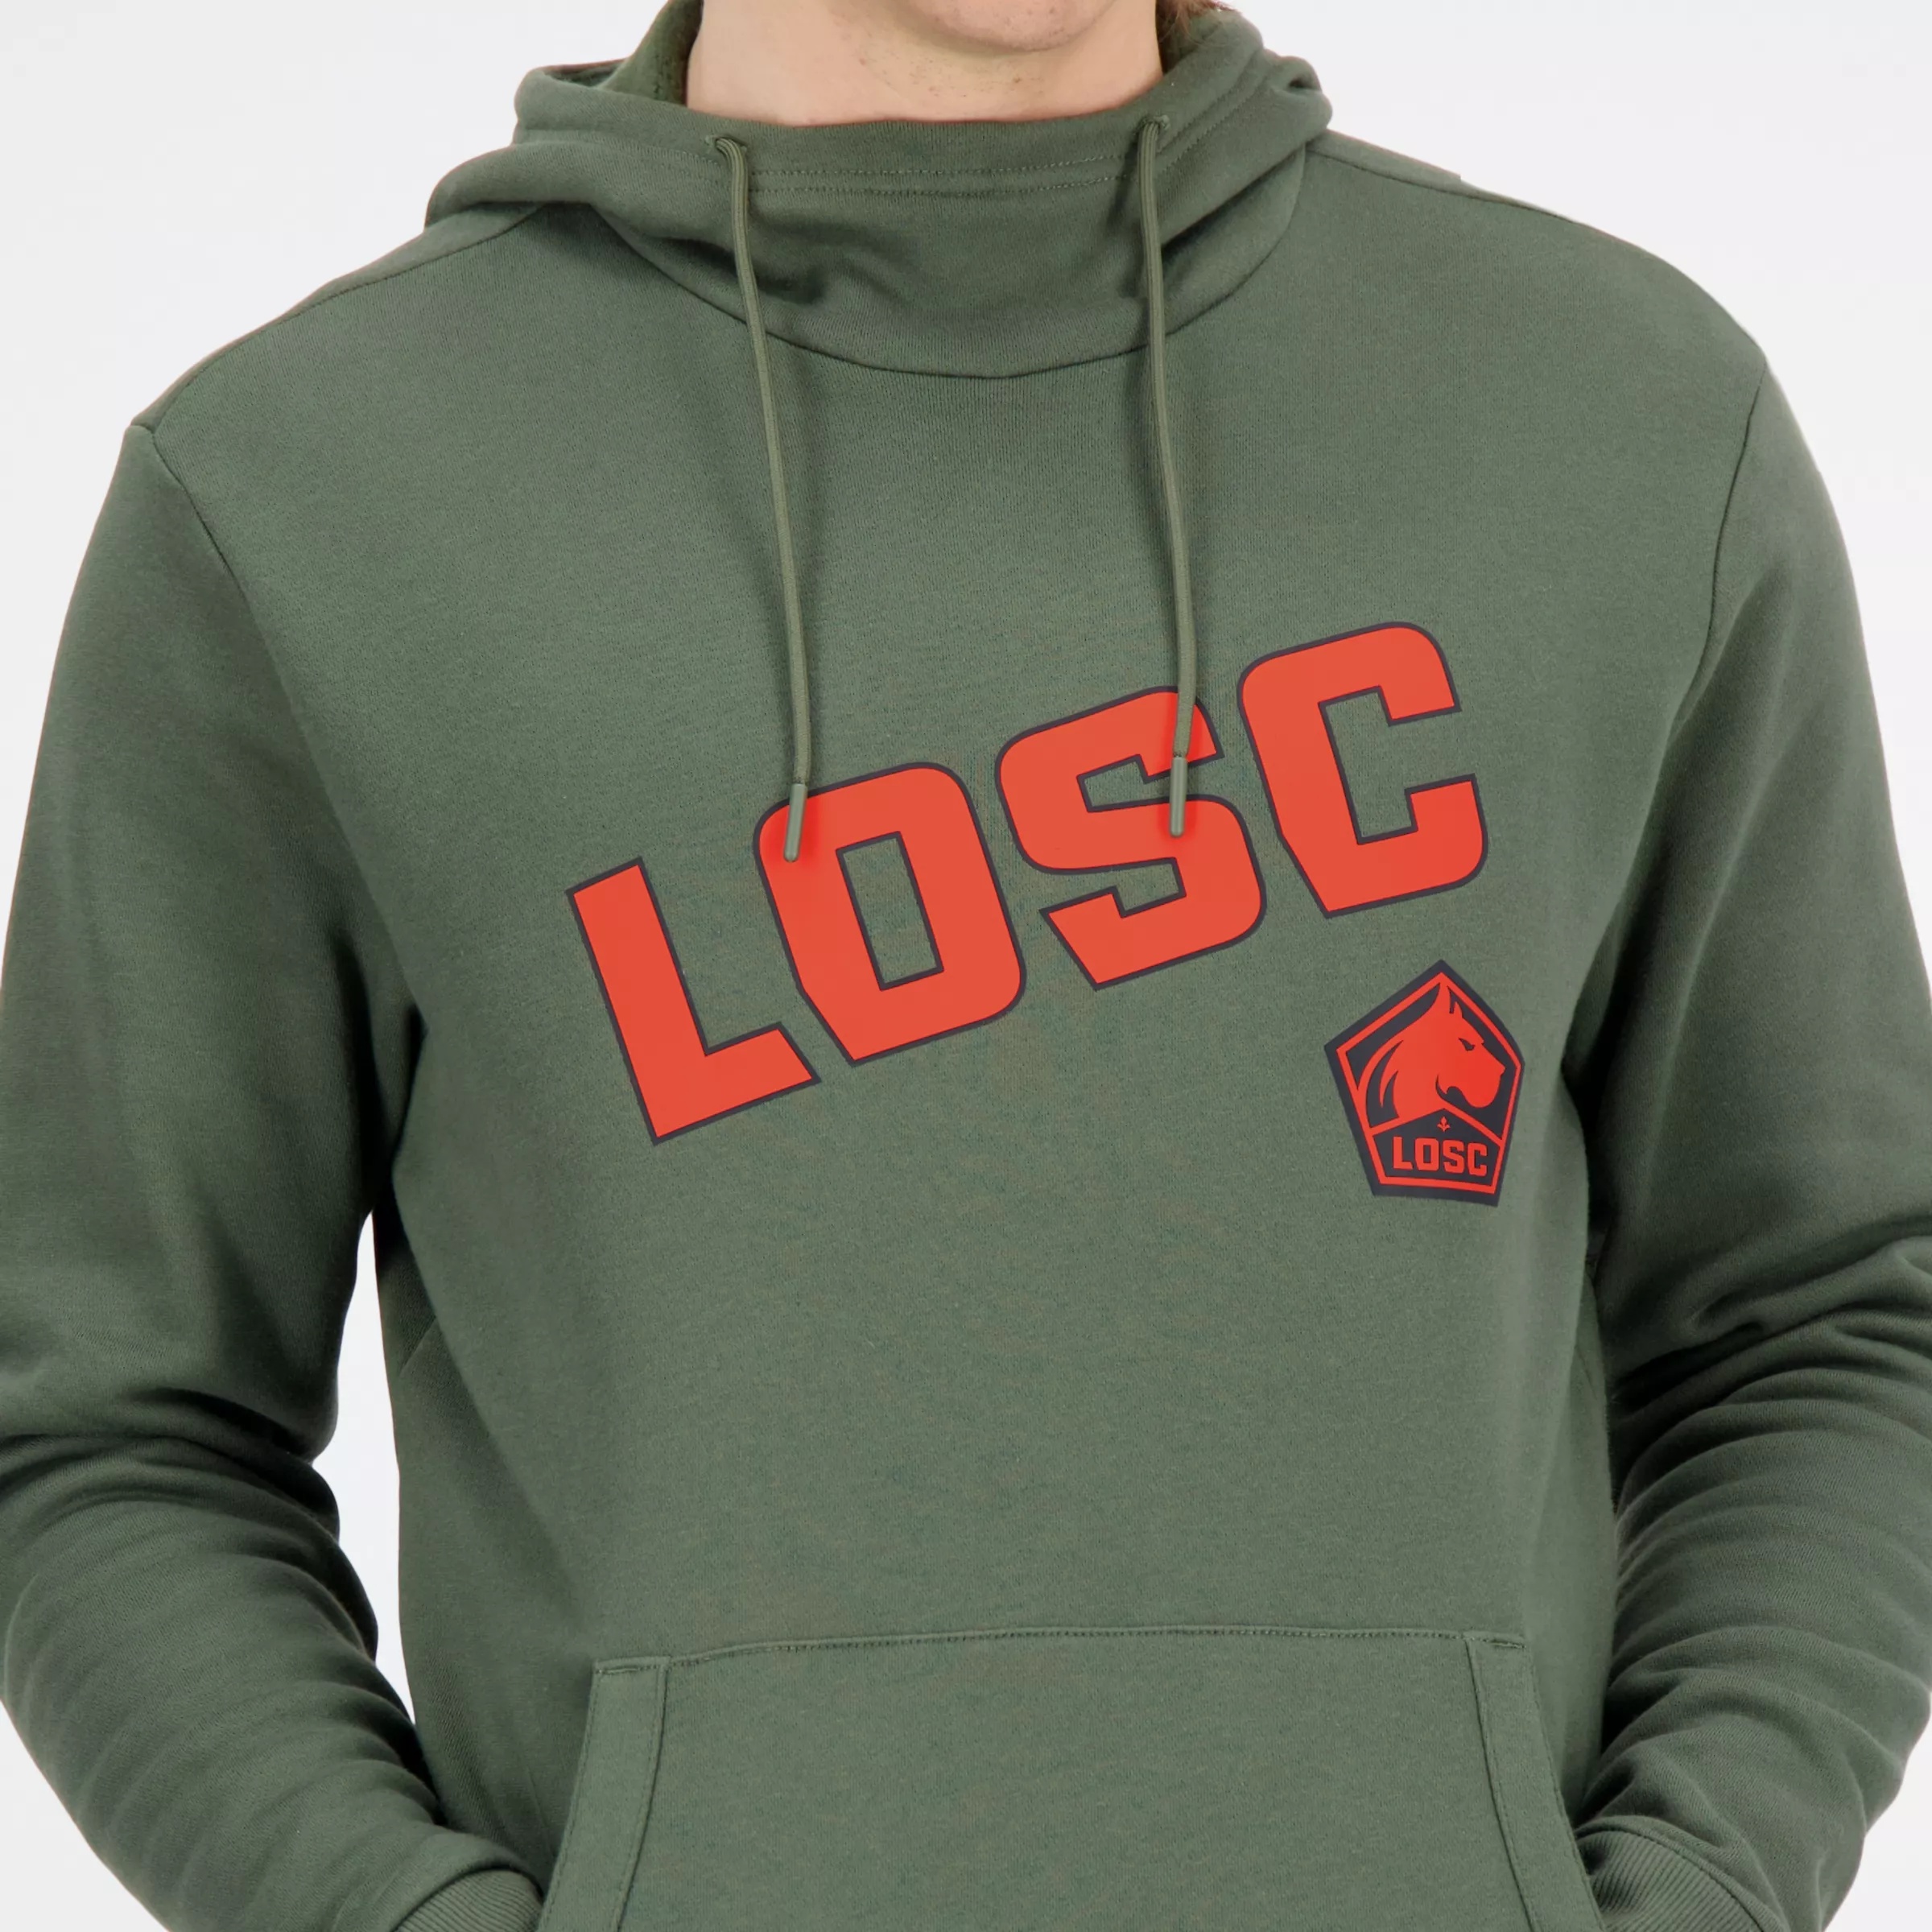 LOSC Lille Graphic Overhead Hoodie - 3